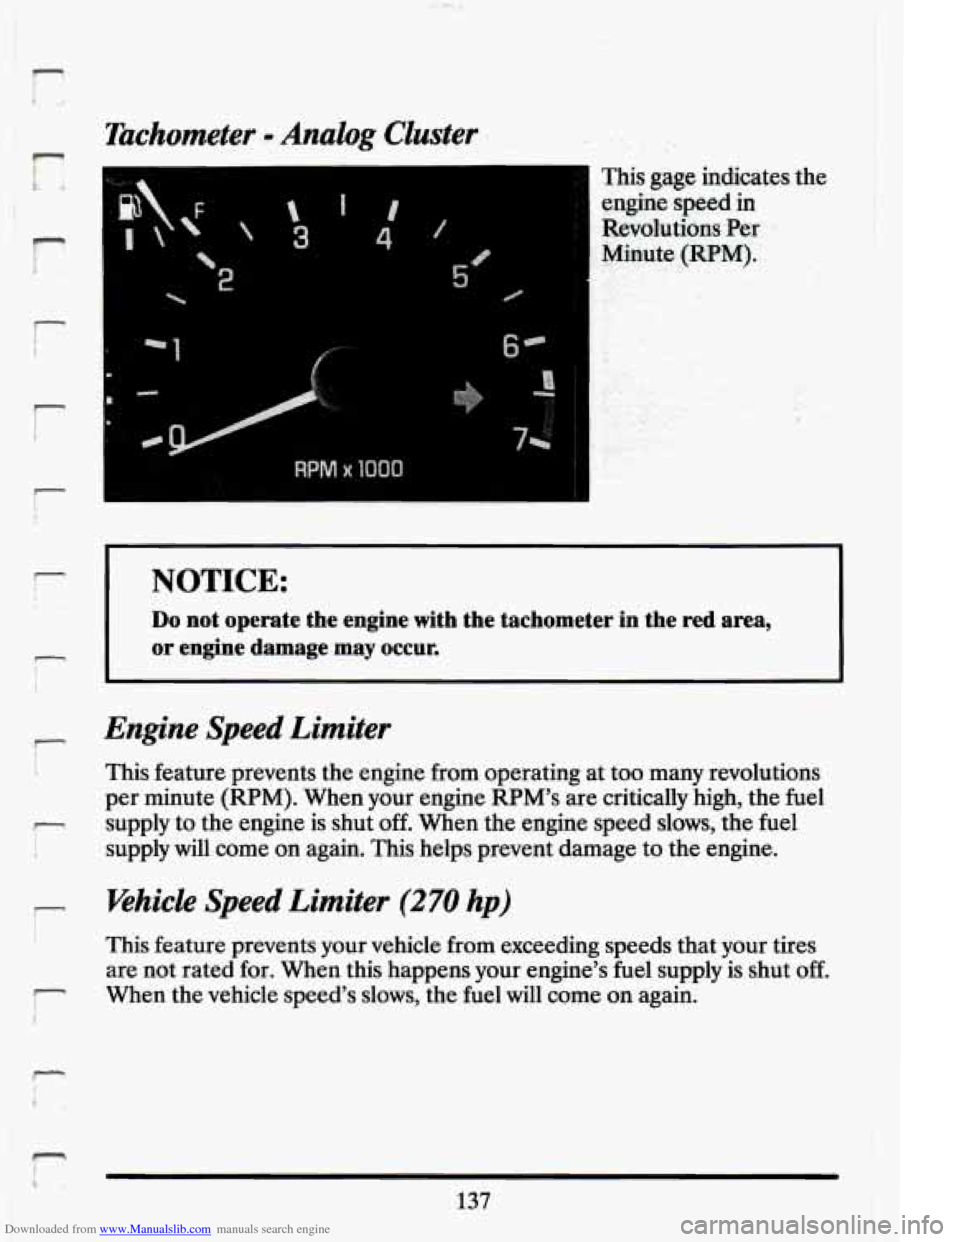 CADILLAC ELDORADO 1994 10.G Owners Manual Downloaded from www.Manualslib.com manuals search engine I I 
Tachometer - Analog Cluster 
1 
2  
I 
5/ 0 
“1 
This  gage  indicates the 
engine  speed in 
Revolutions  Per 
Minute  (RPM). 
r I NOTI